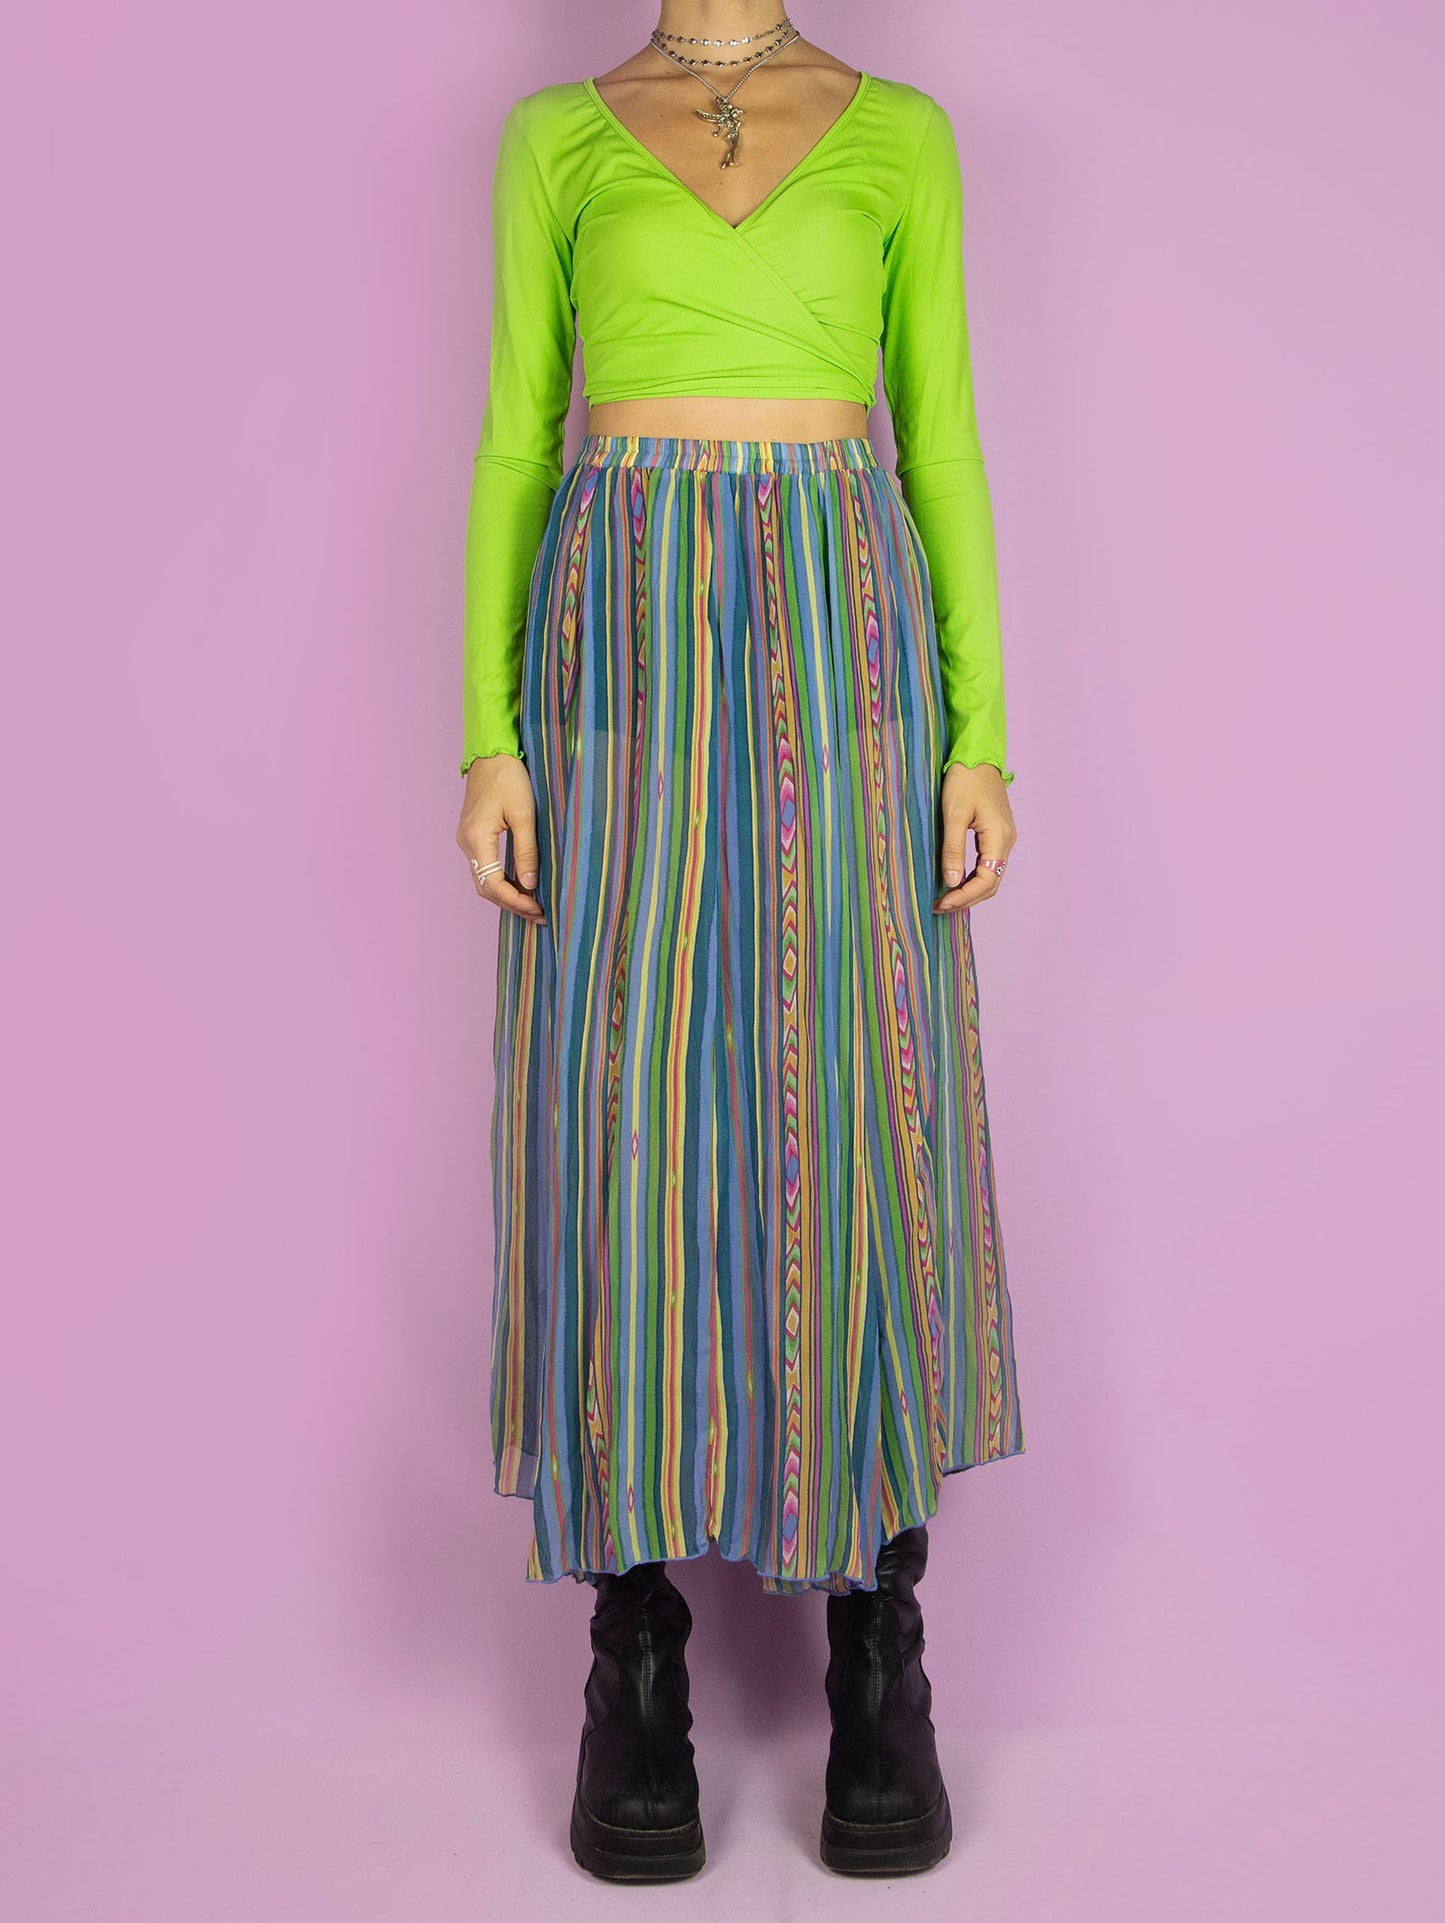 The Vintage 90s Boho Sheer Midi Skirt is a semi-transparent multicolored striped silk skirt with an elastic waistband. Summer beach 1990s flowy cover-up maxi skirt.